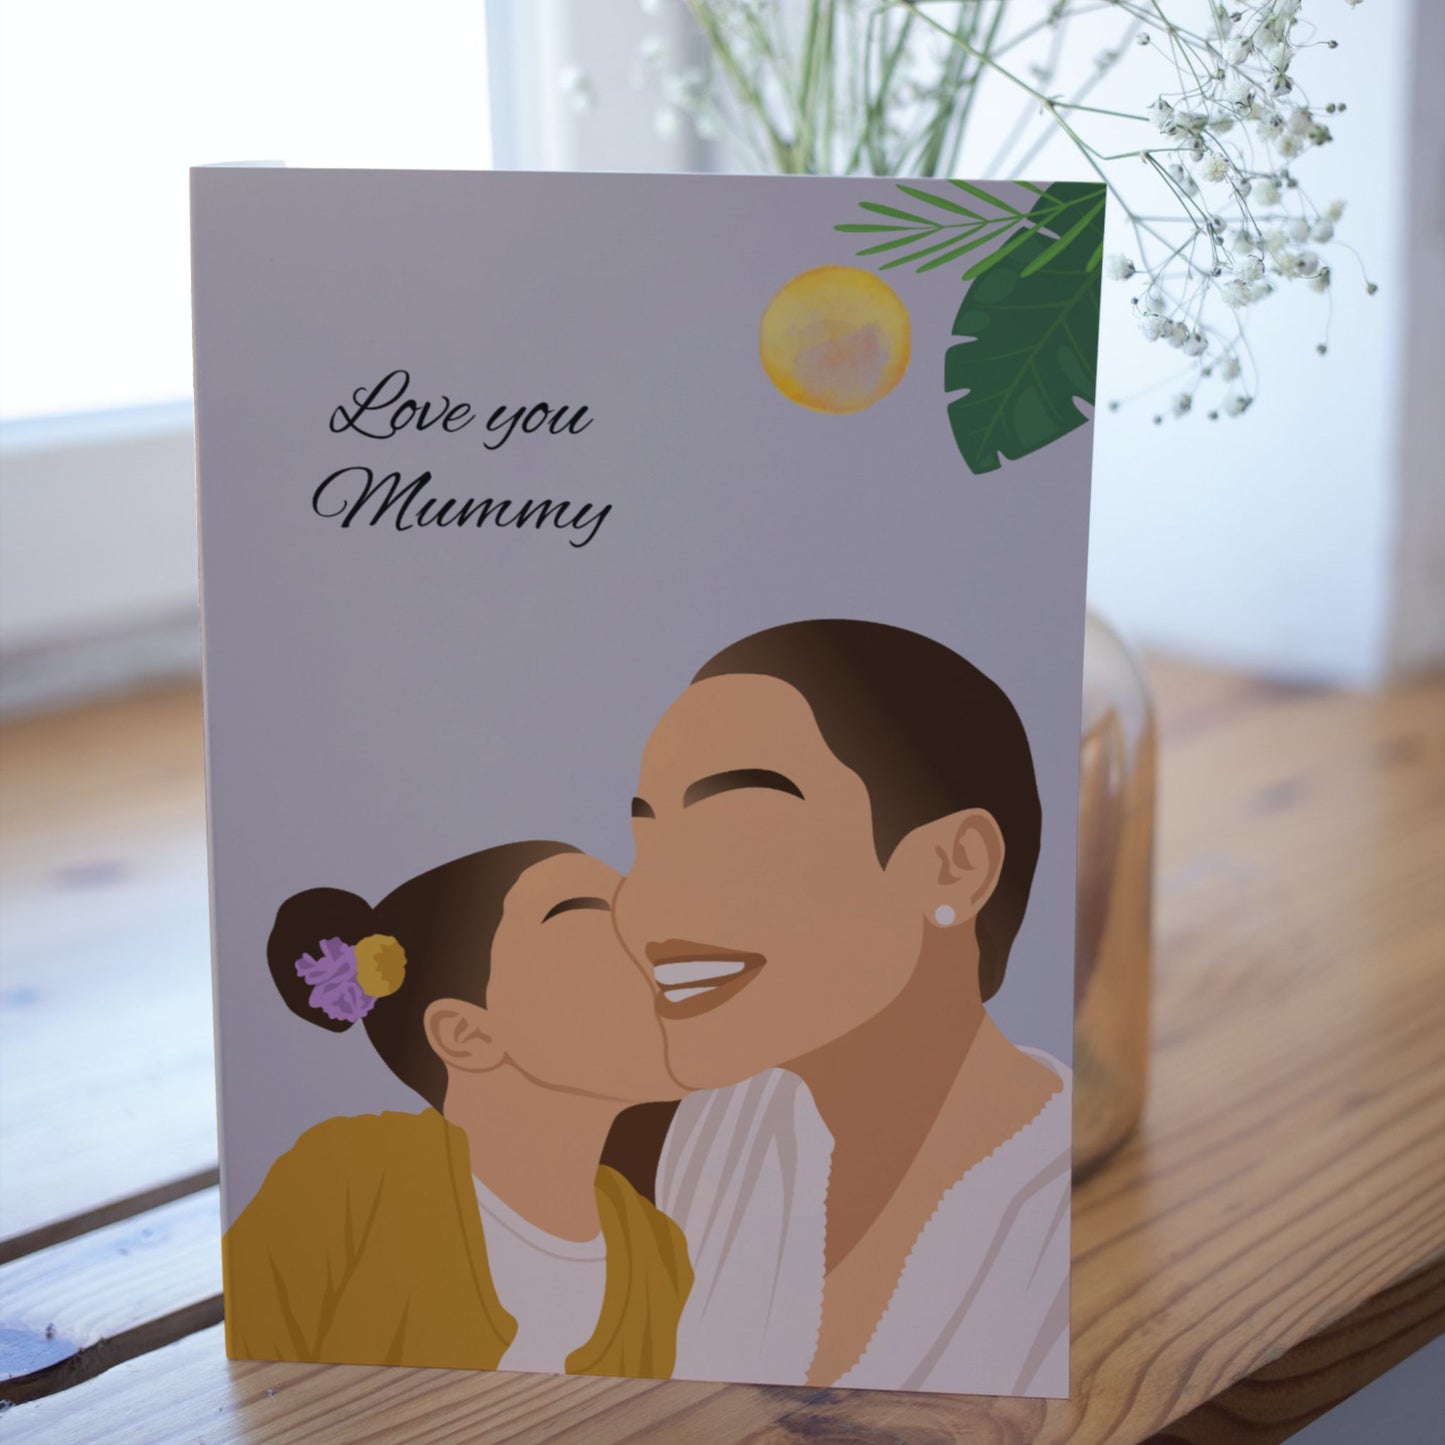 Black Mother And Young Daughter Mother's Day Card.